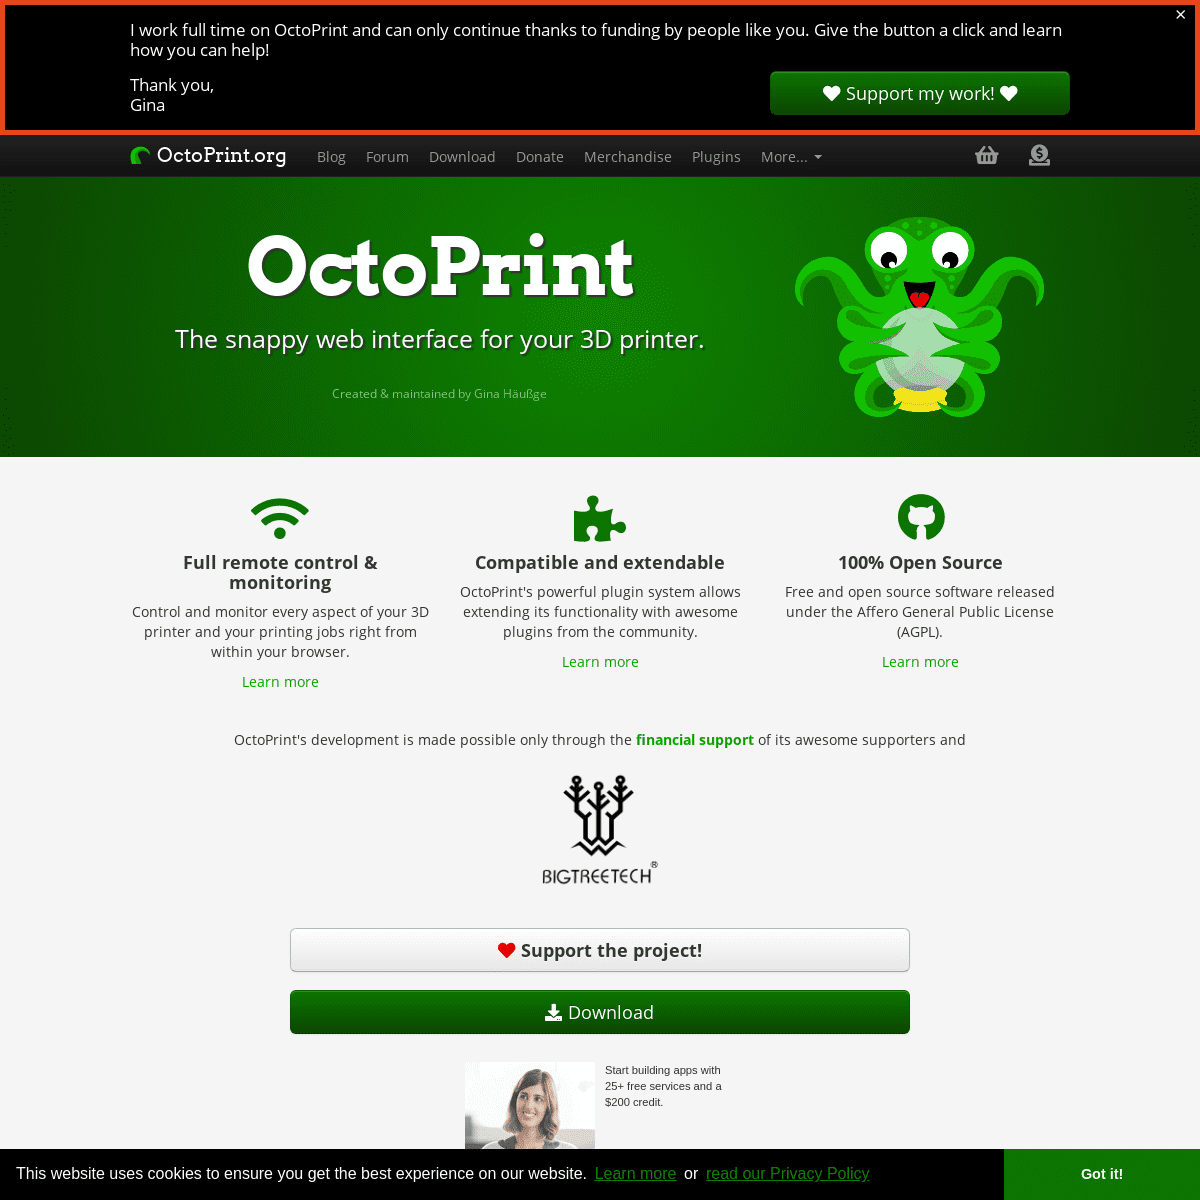 A complete backup of octoprint.org